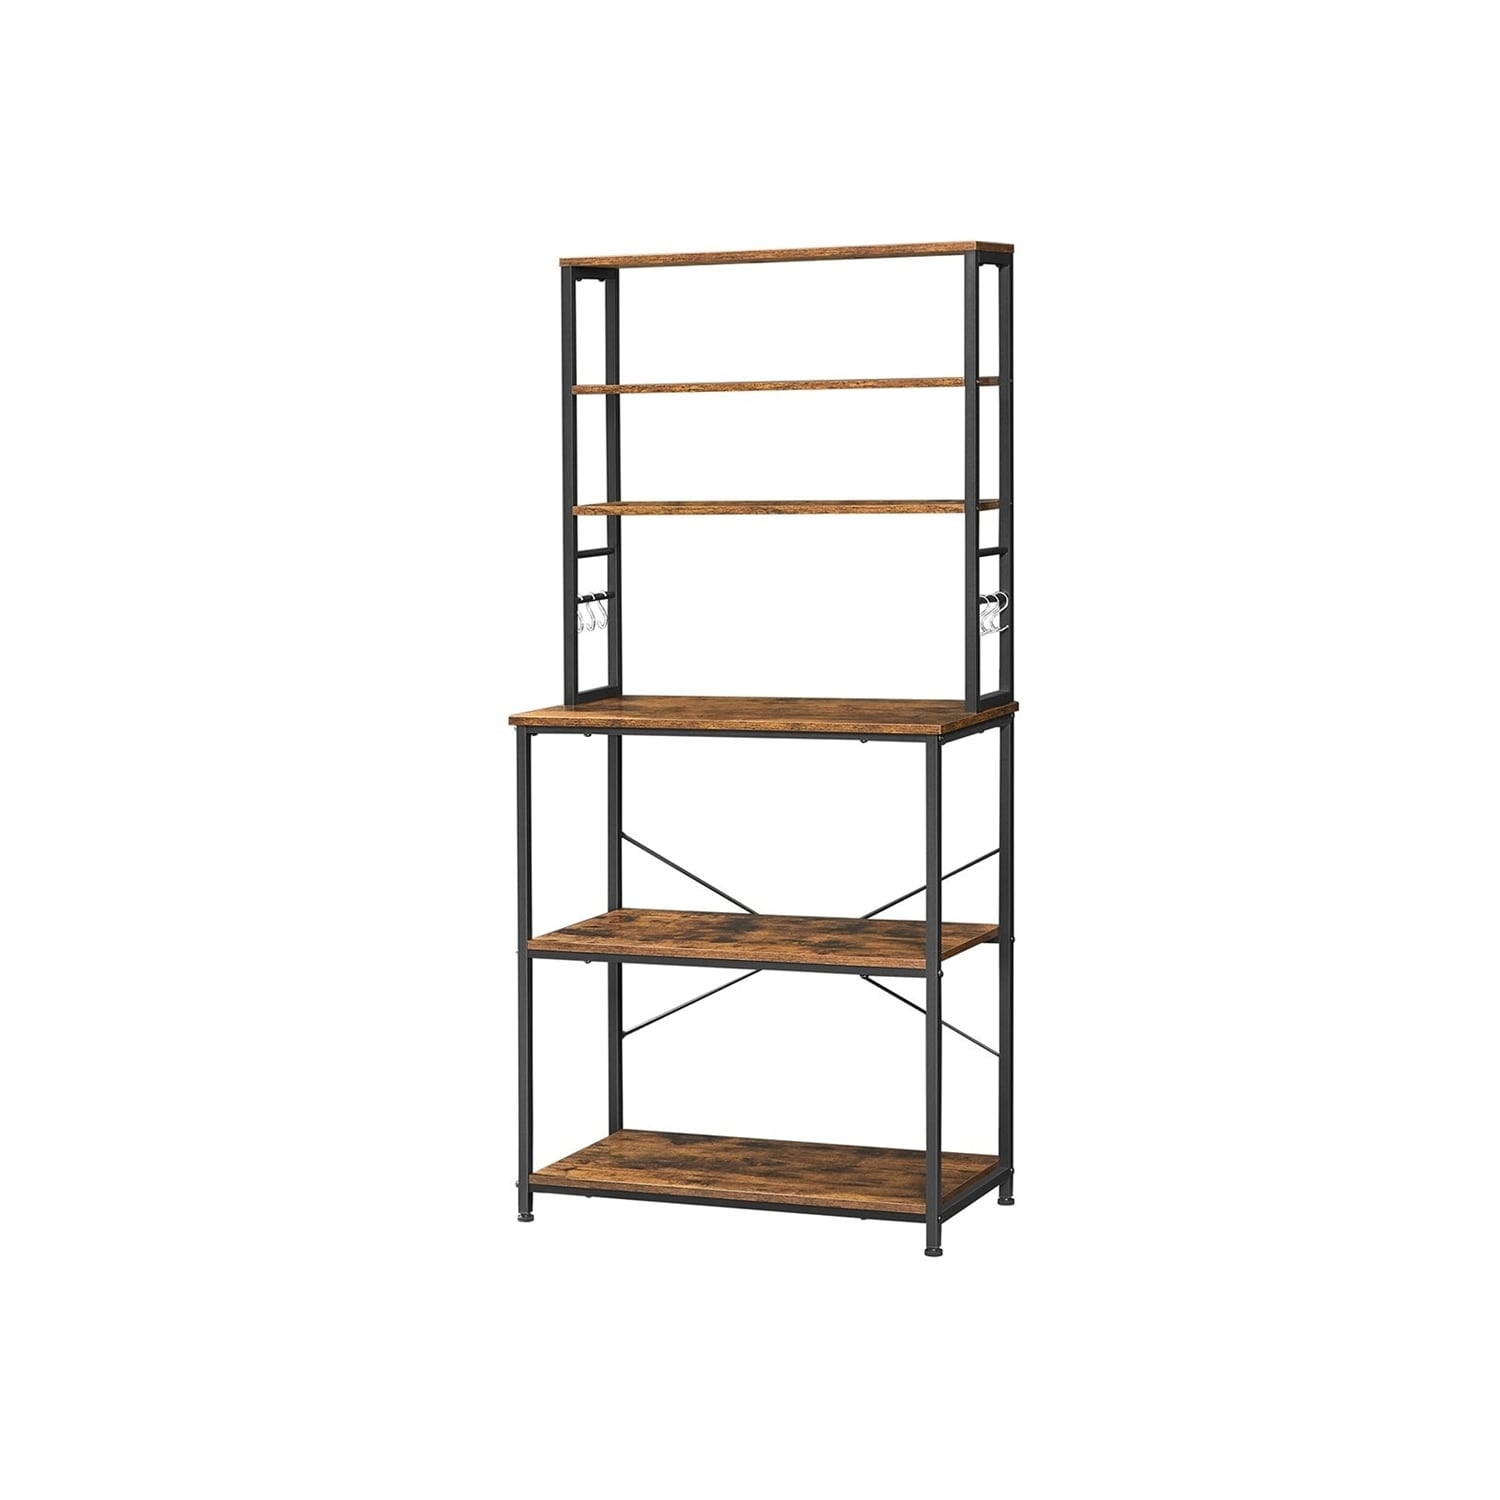 https://ak1.ostkcdn.com/images/products/is/images/direct/13167676b0402573e0ea52215d7dbc062b2633d4/Farmhouse-6-Tier-Industrial-Utility-Kitchen-Bakers-Rack-Microwave-Stand.jpg